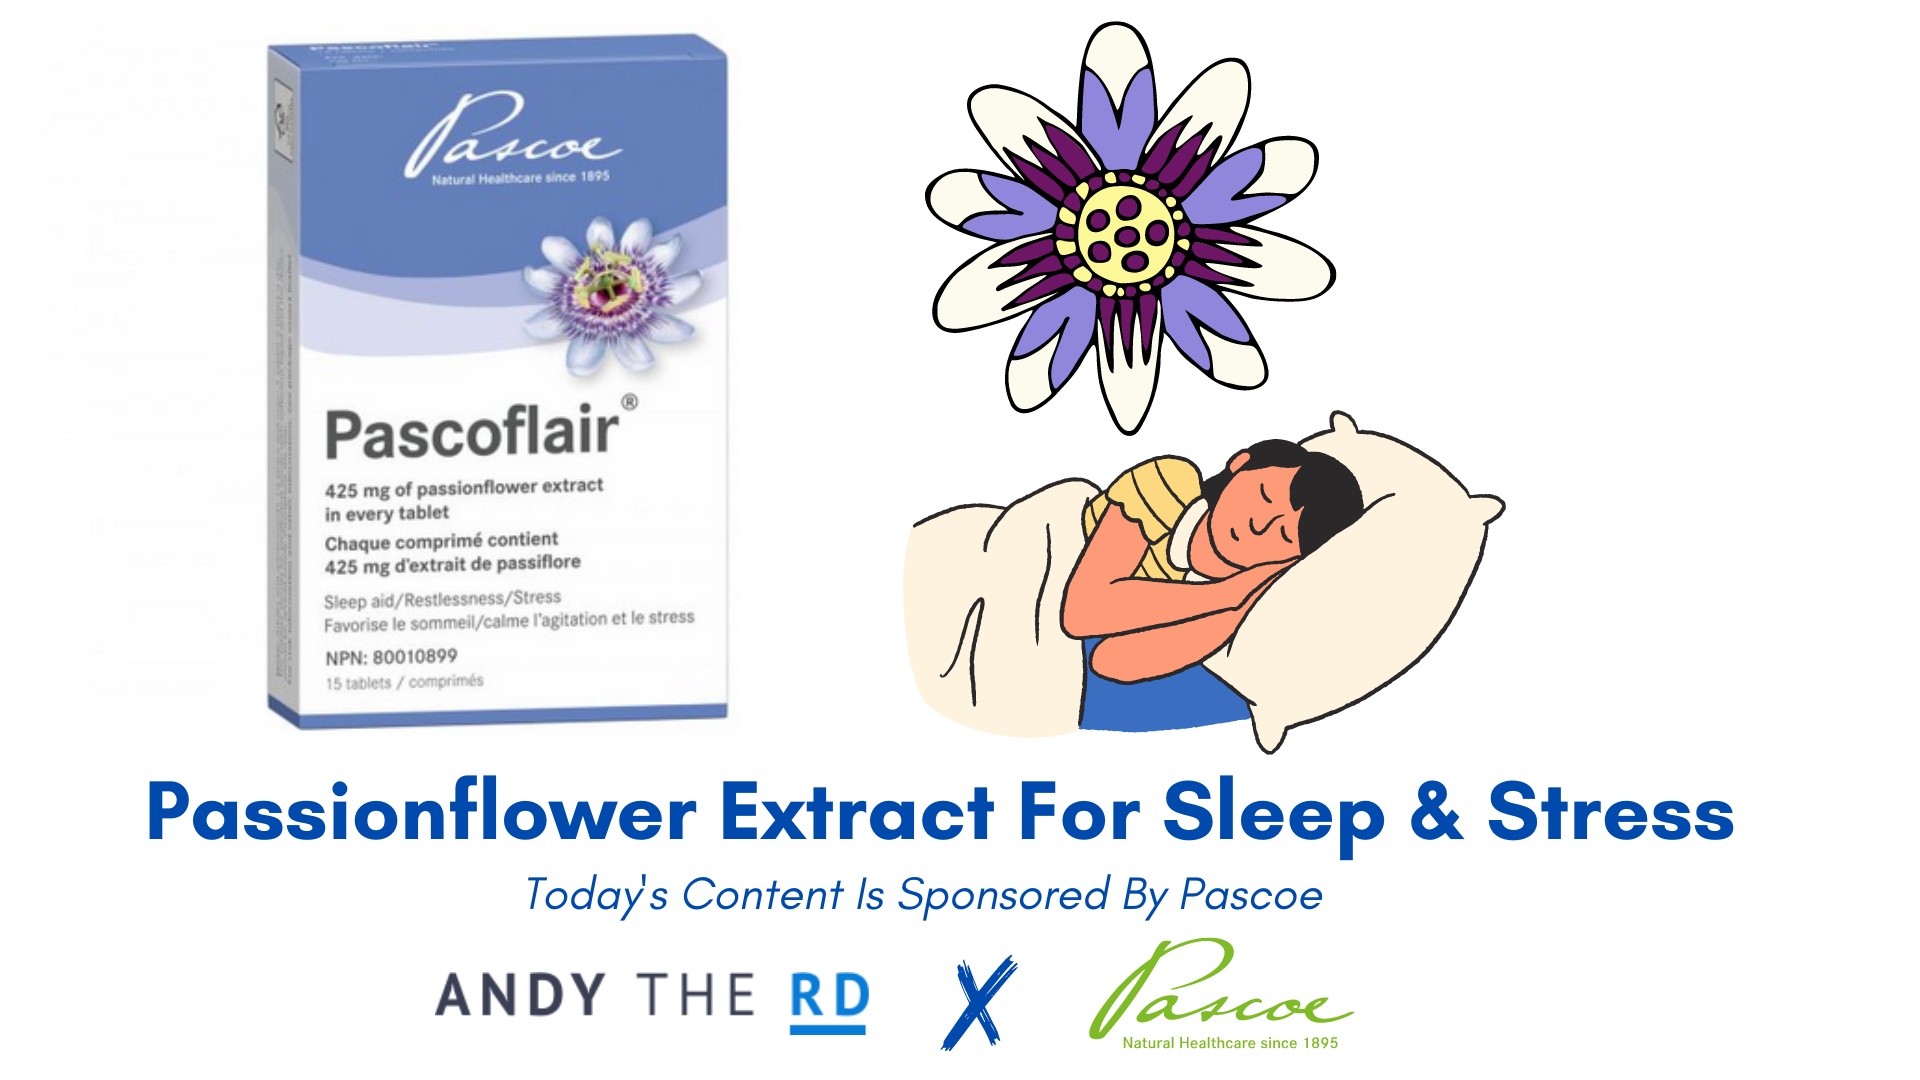 Passionflower Extract For Sleep & Stress Reduction